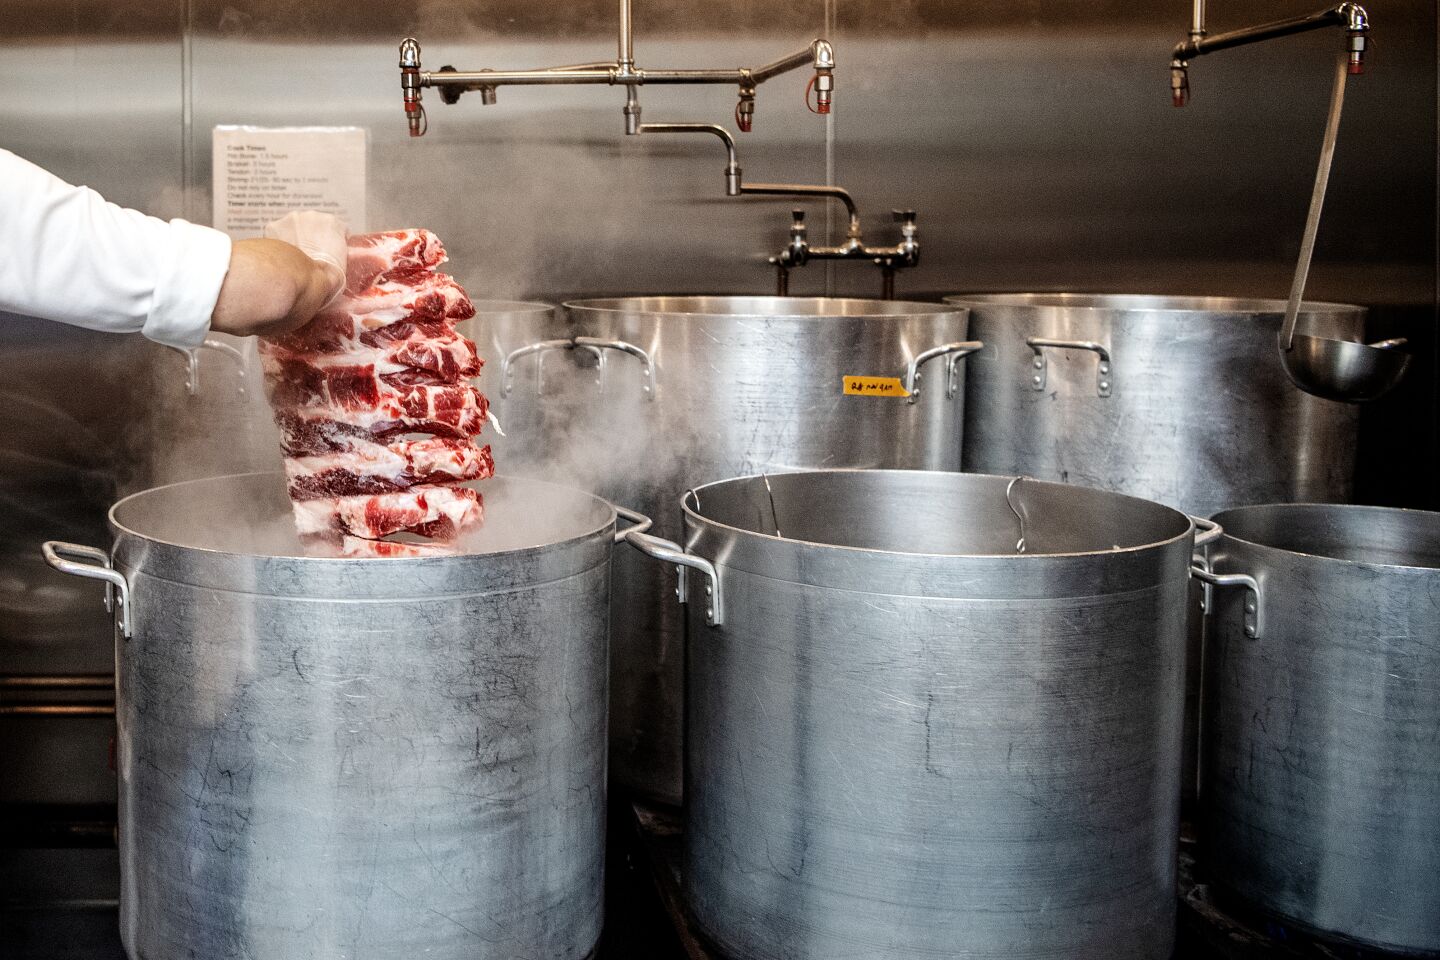 Chef Viet Nguyen drops cuts of meat to pots into begin cooking his pho broth. The entire process takes 48 hours.